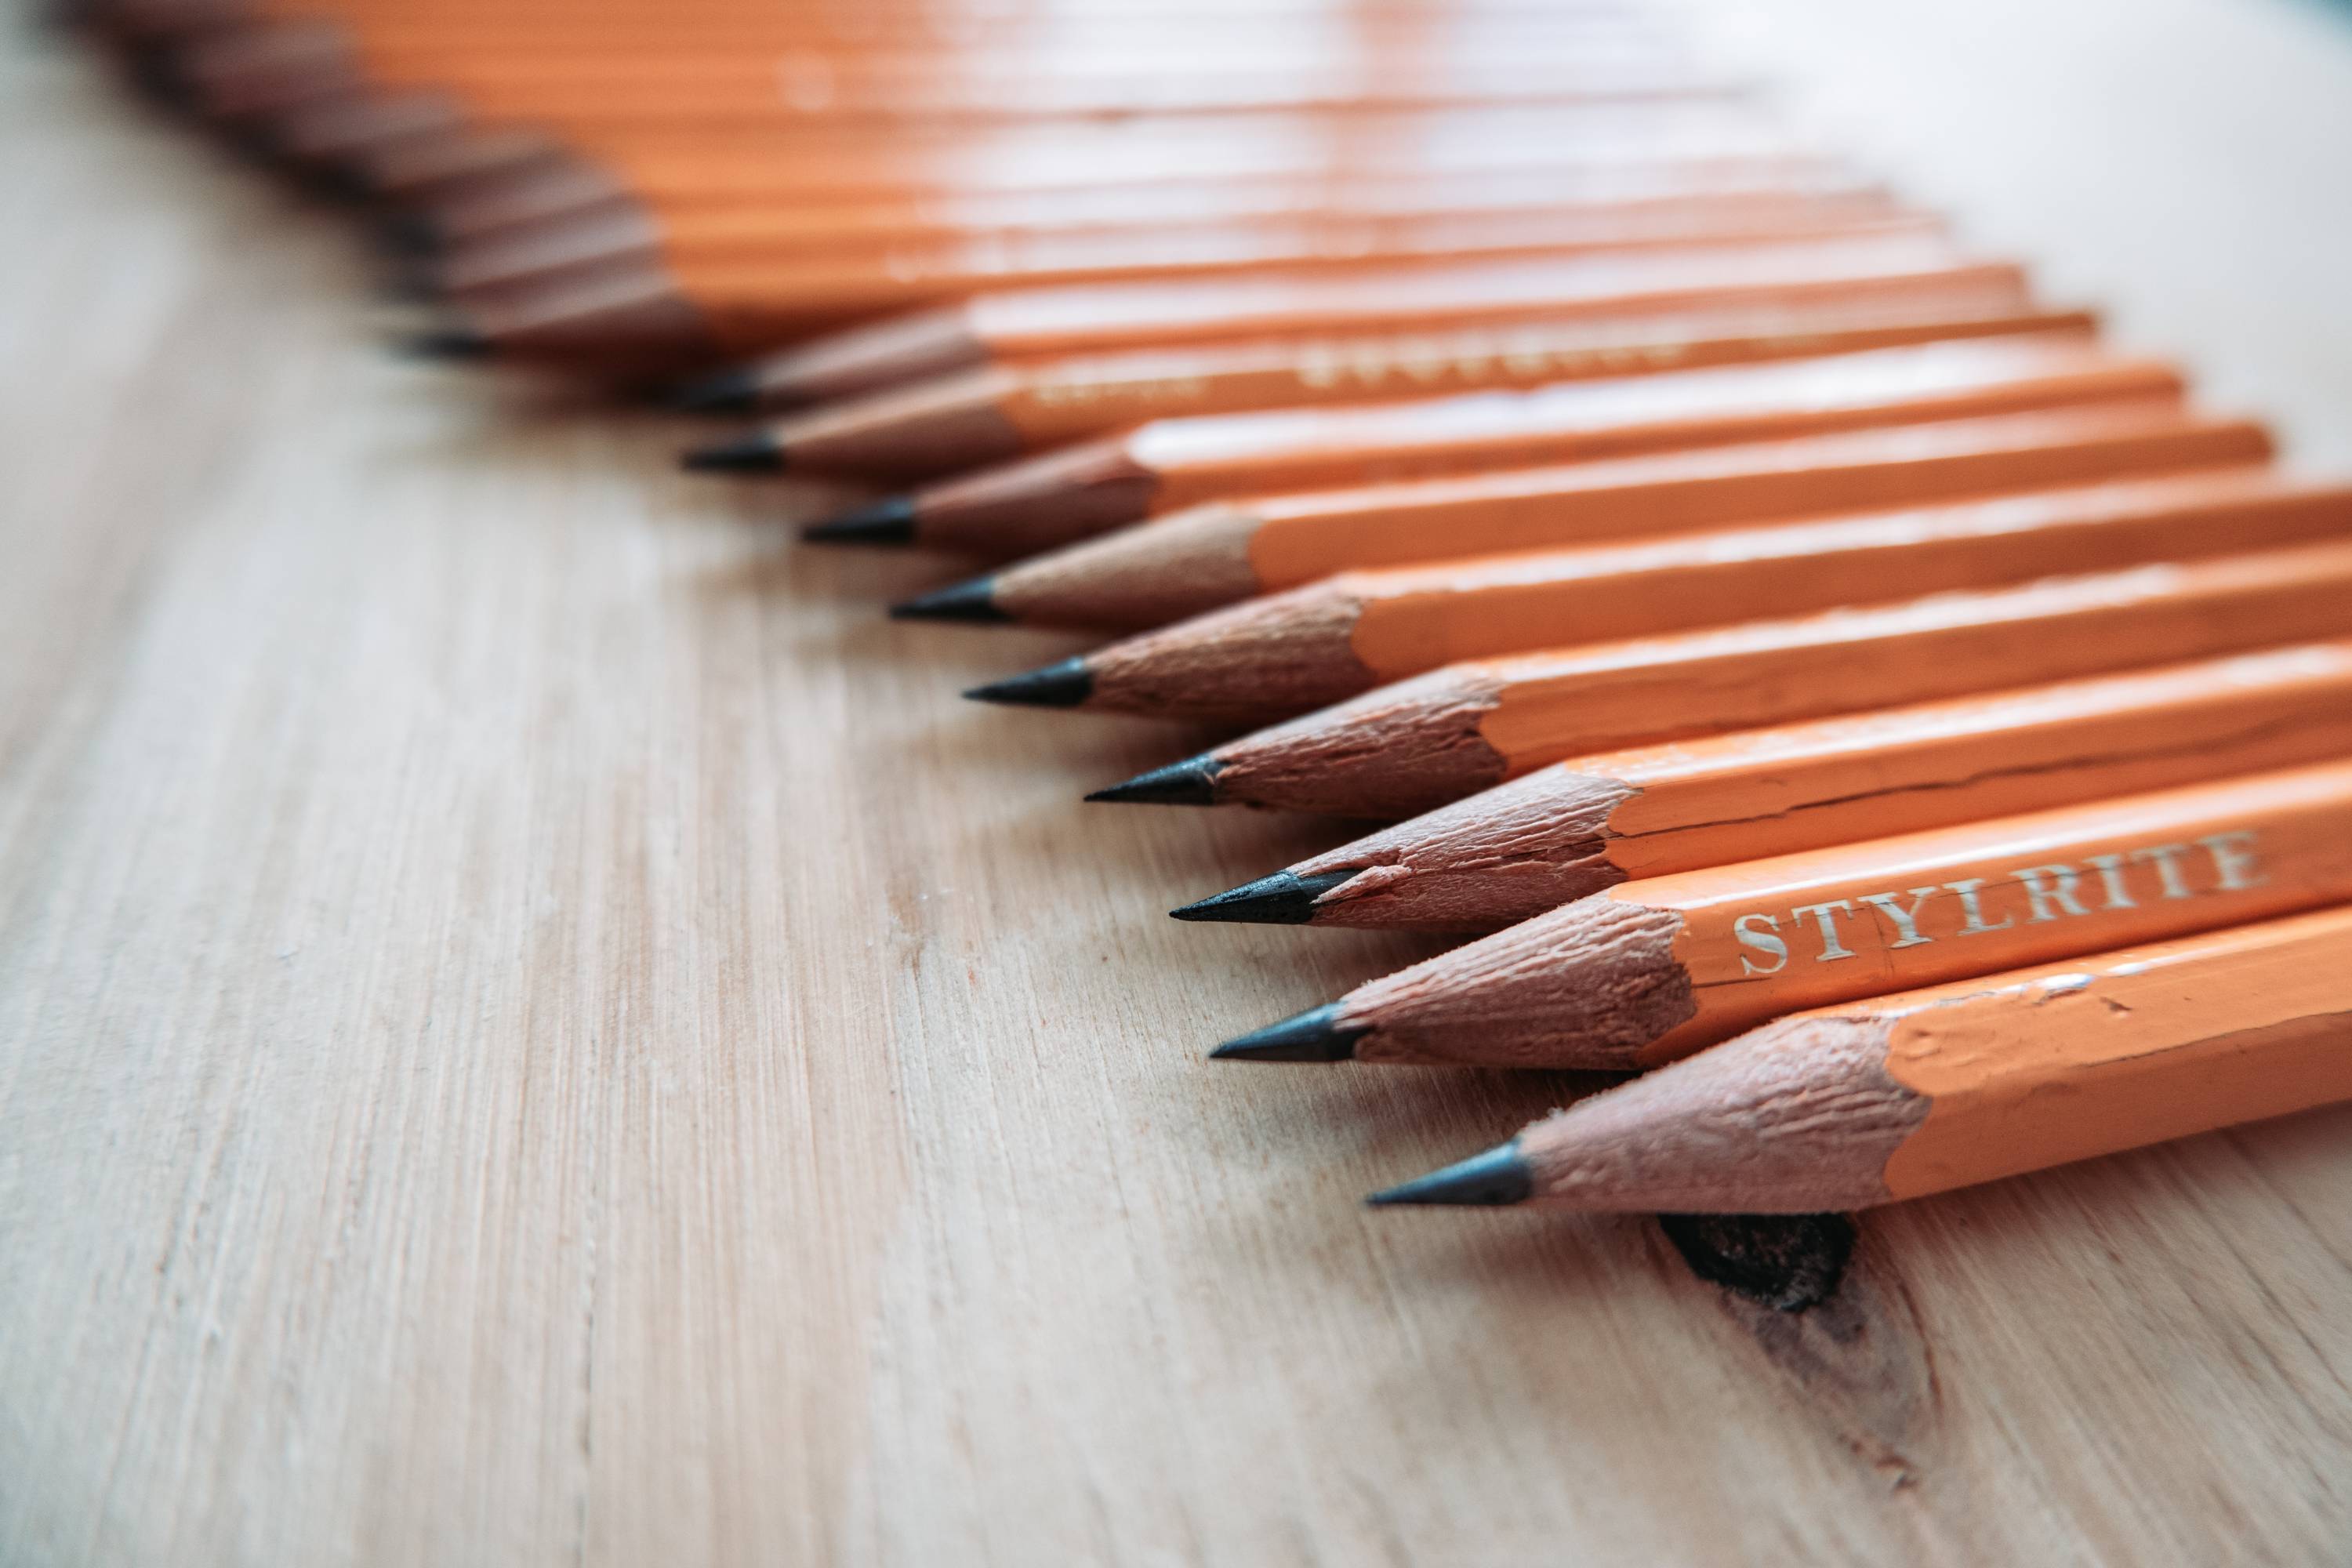 pencils lined up on a wooden table